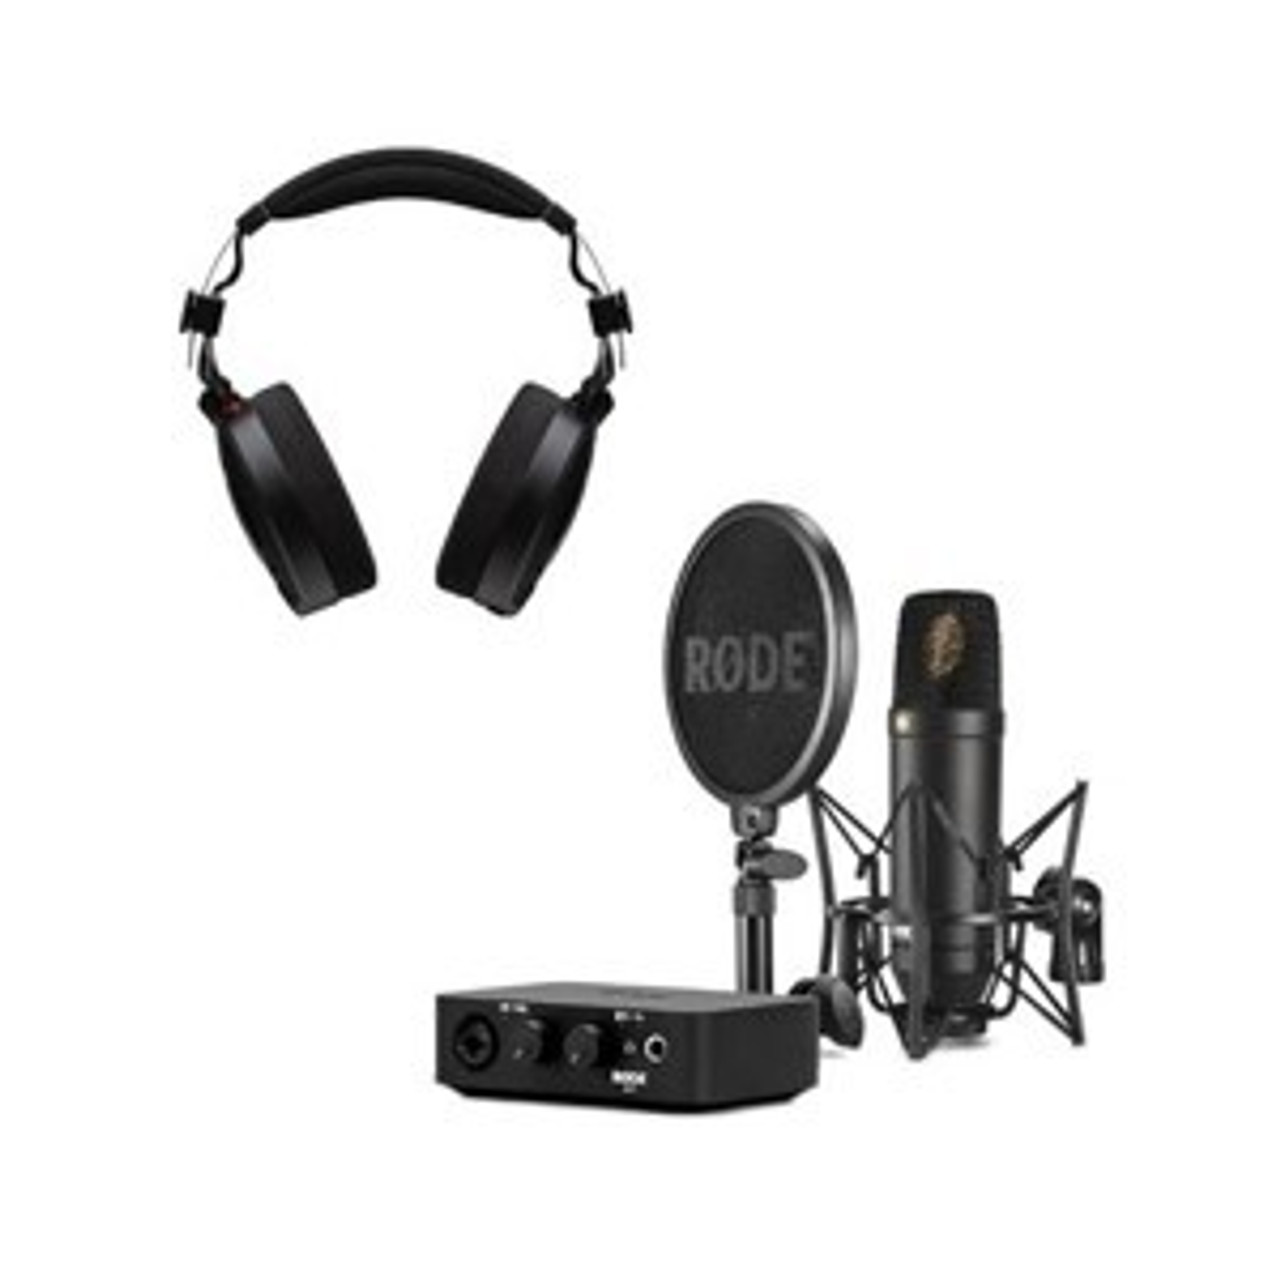 Rode Complete Studio Kit with AI-1 Audio Interface, NT1 Microphone, SM6  Shockmount, and Cables